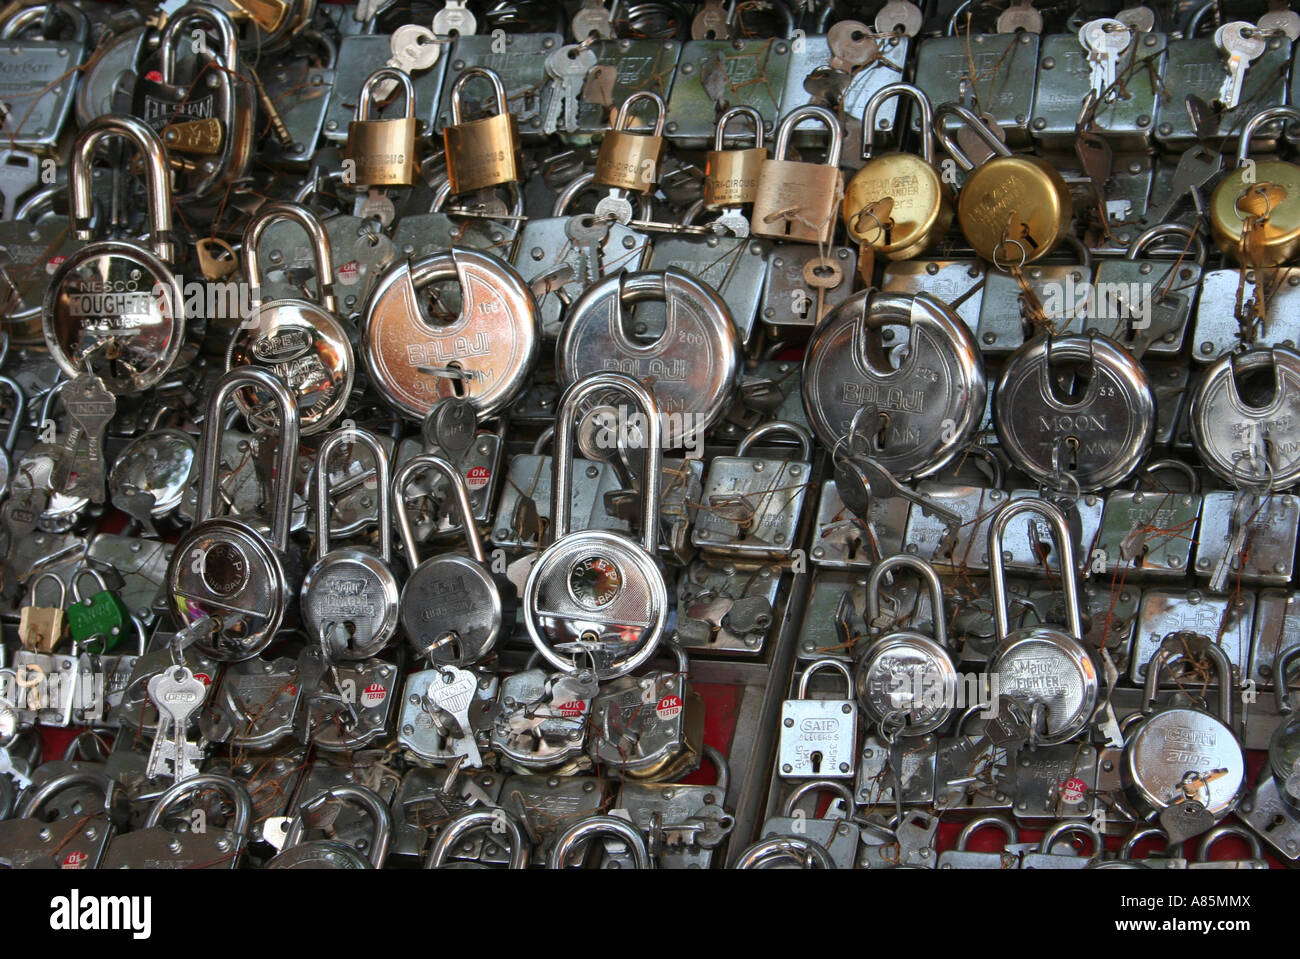 A variety of padlocks for sale on a street stall in Jaipur, India. Stock Photo